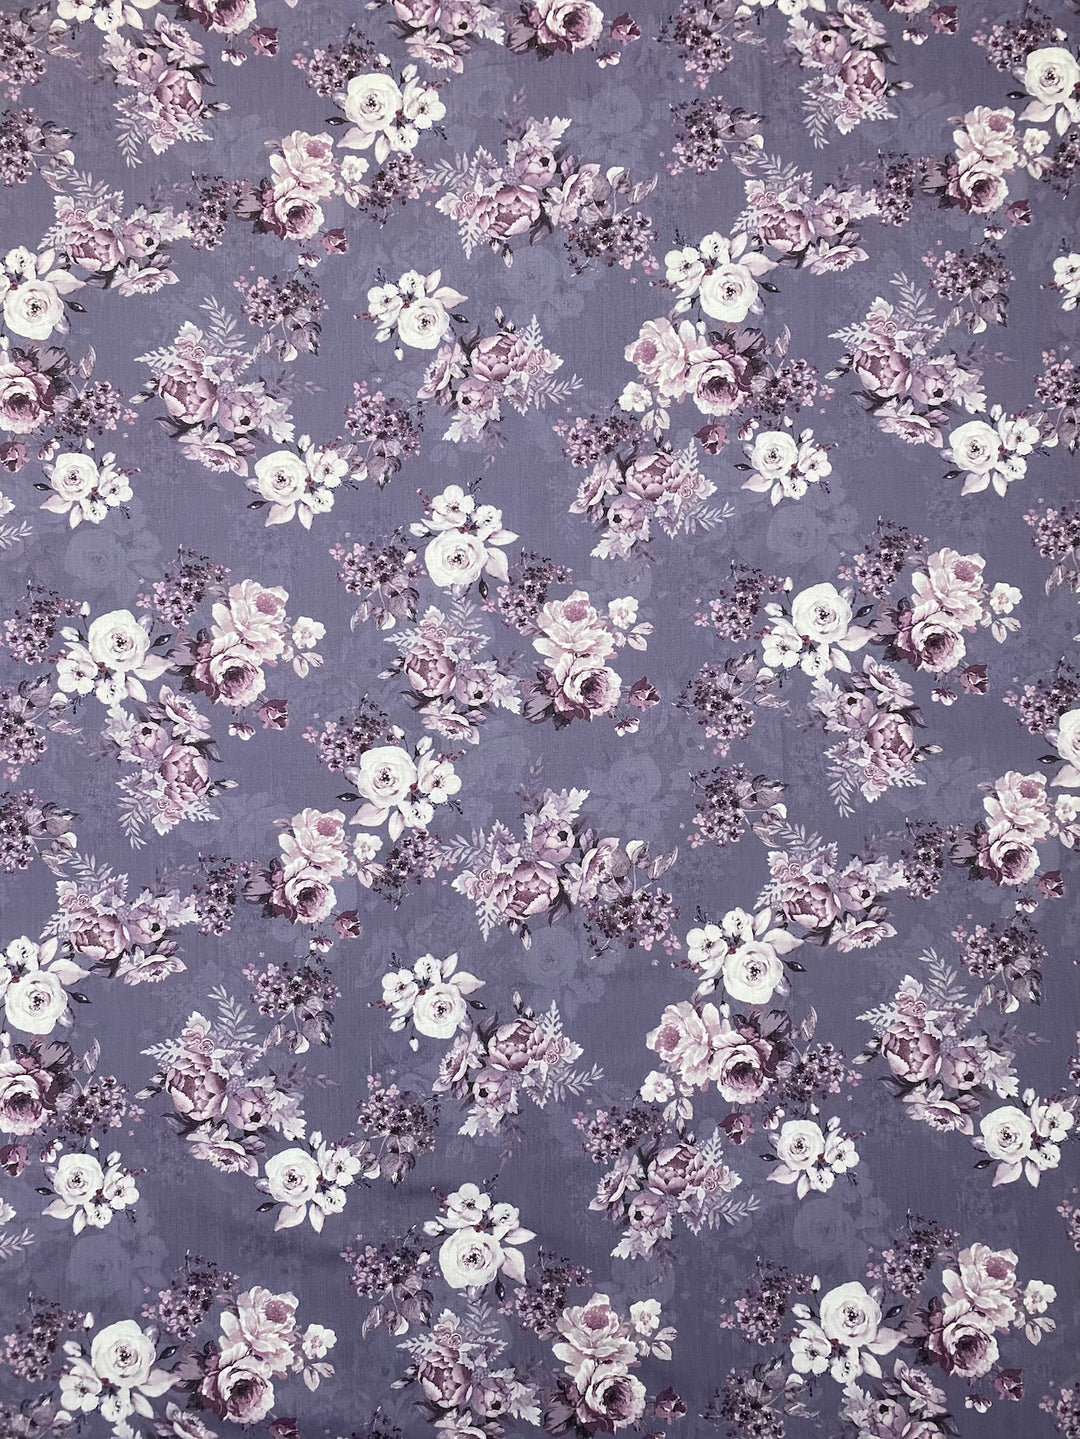 Printed Floral Cotton Fabric Purple